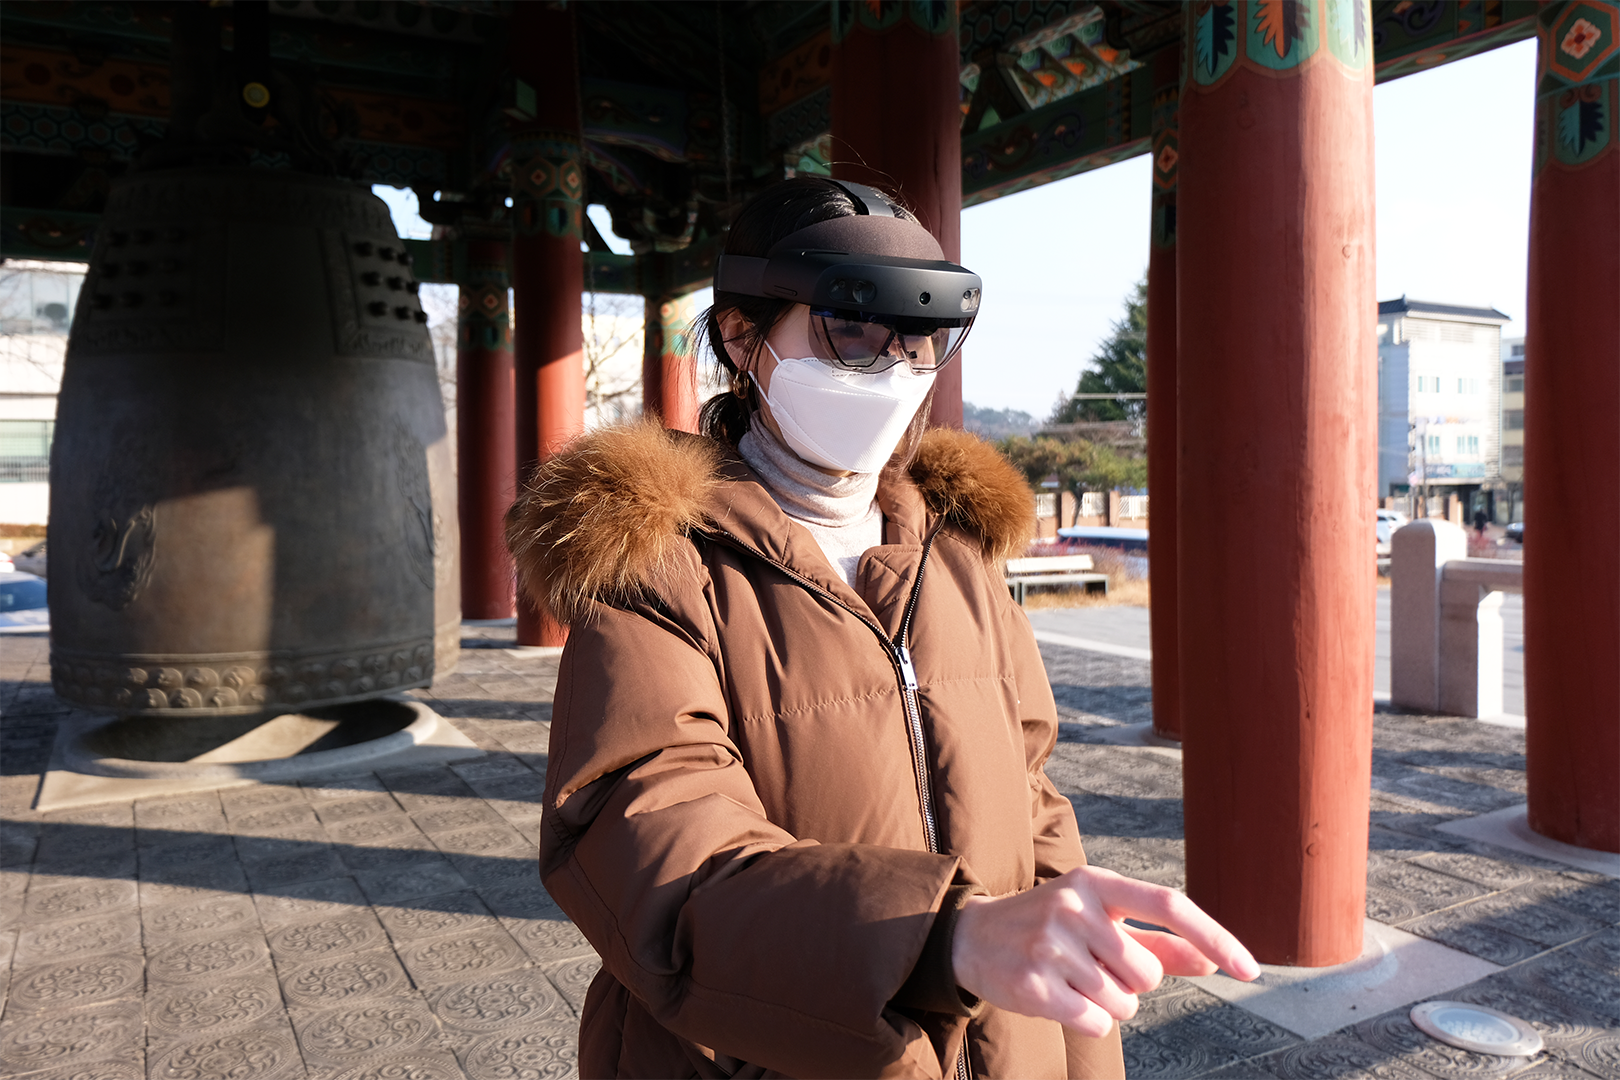 DoubleMe team member demonstrates the TwinWorld's use outdoors while wearing the HoloLens 2 headset.